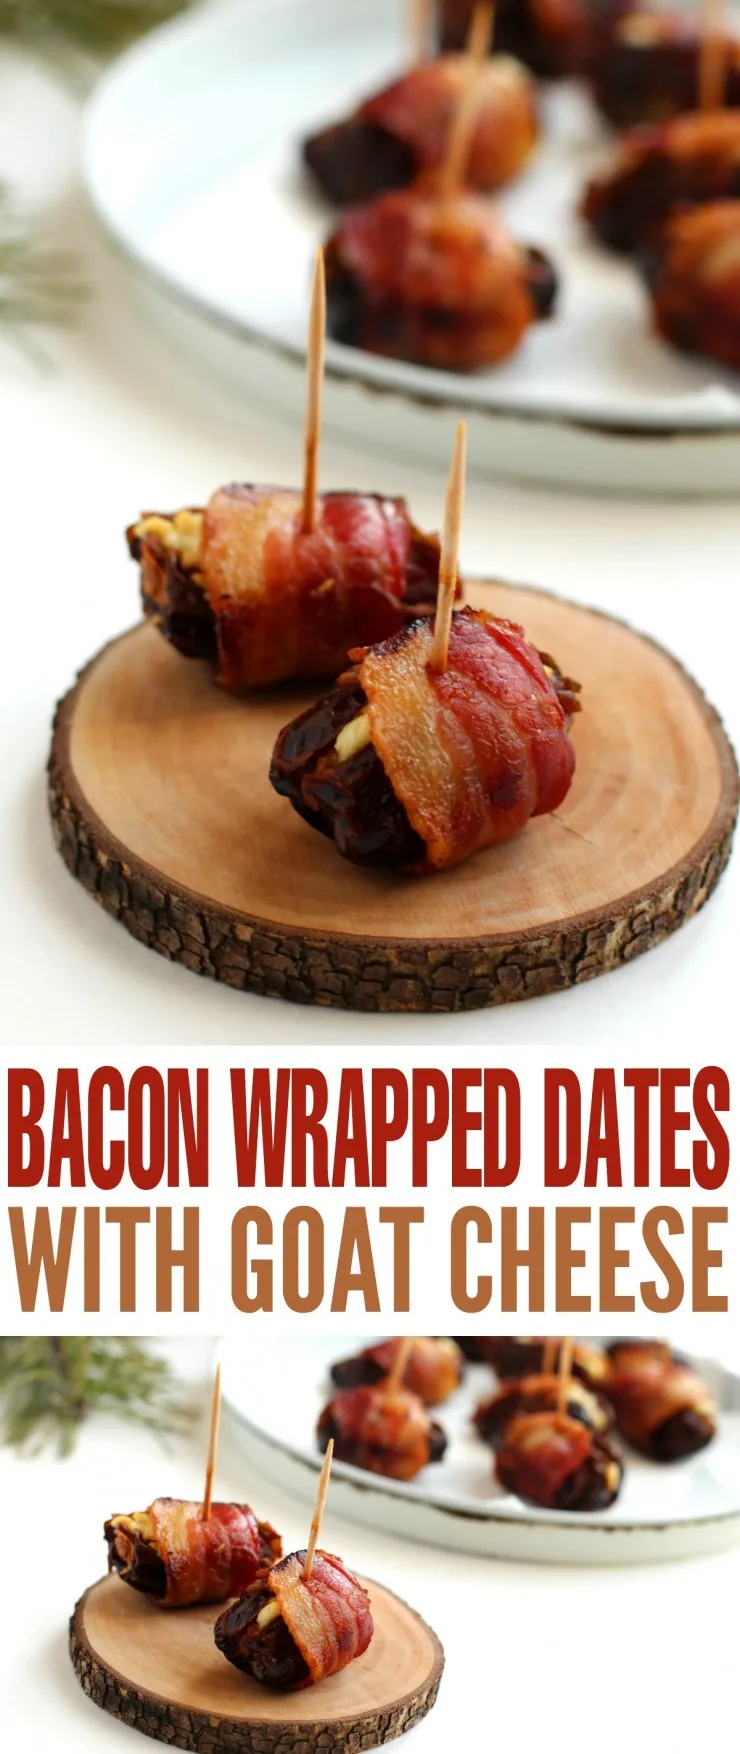 These Bacon Wrapped Dates with Goat Cheese are a perfect holiday appetizer. This is one of those party foods that will have everyone asking you for the recipe!